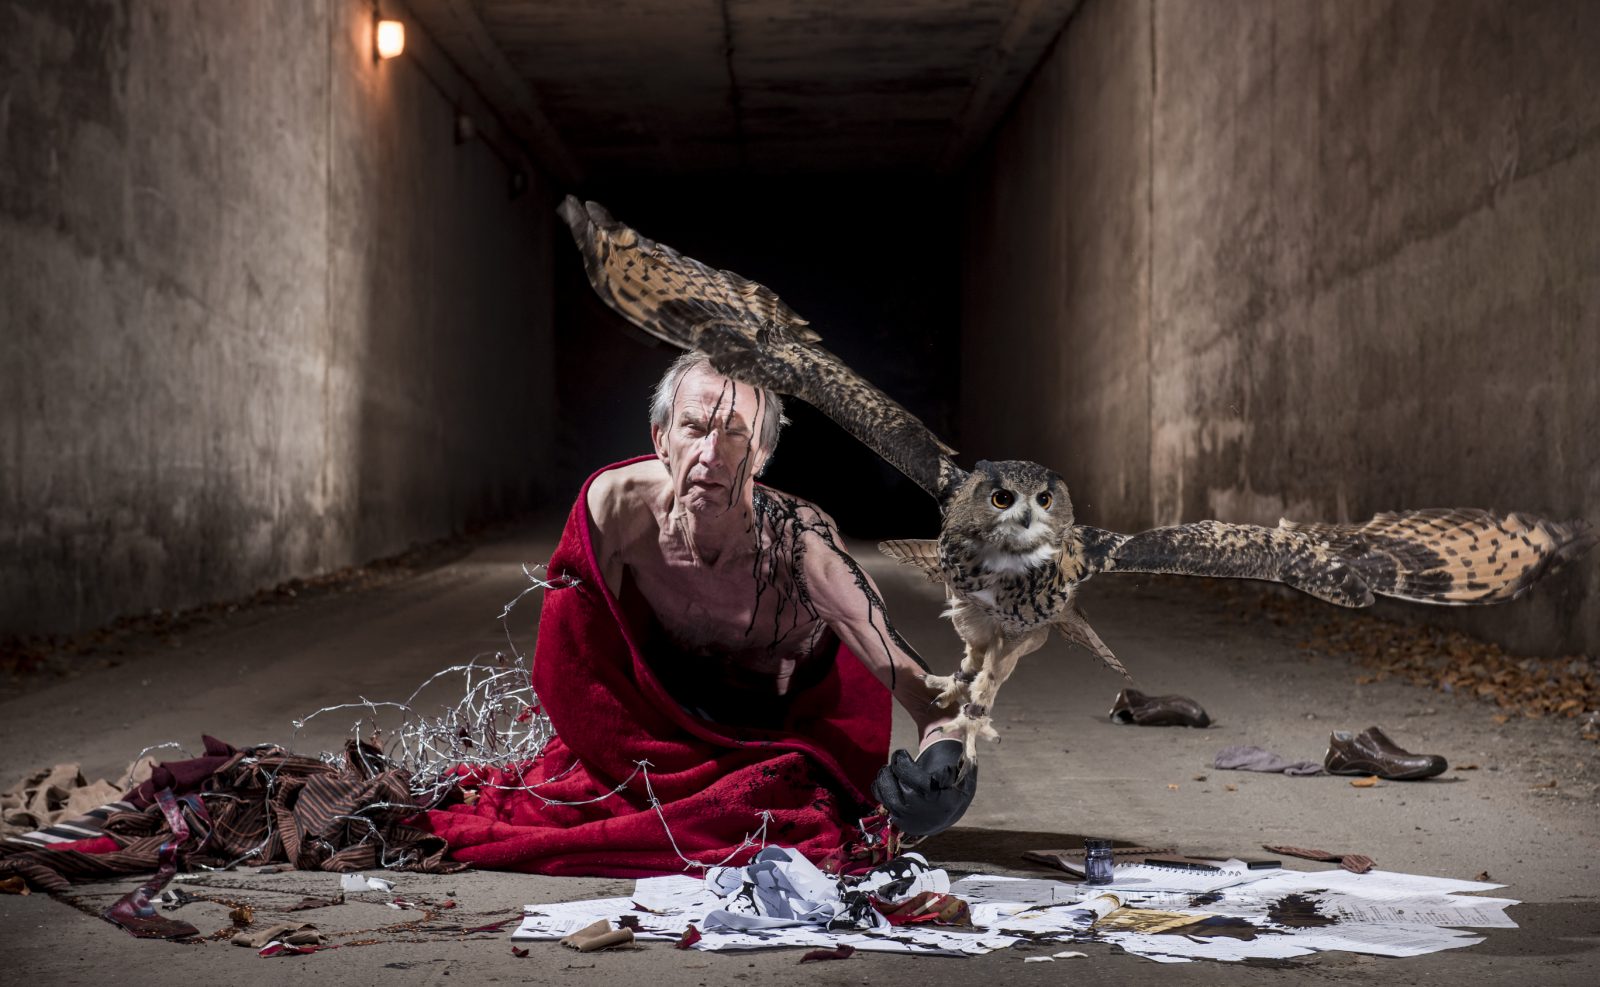 A topless man wrapped in a red blanket and barbed wire is kneeling in a concrete tunnel.  He is surrounded by clothes and papers. Oil drips on his head and down his shoulder. A large owl is taking flight from his outstretched arm.